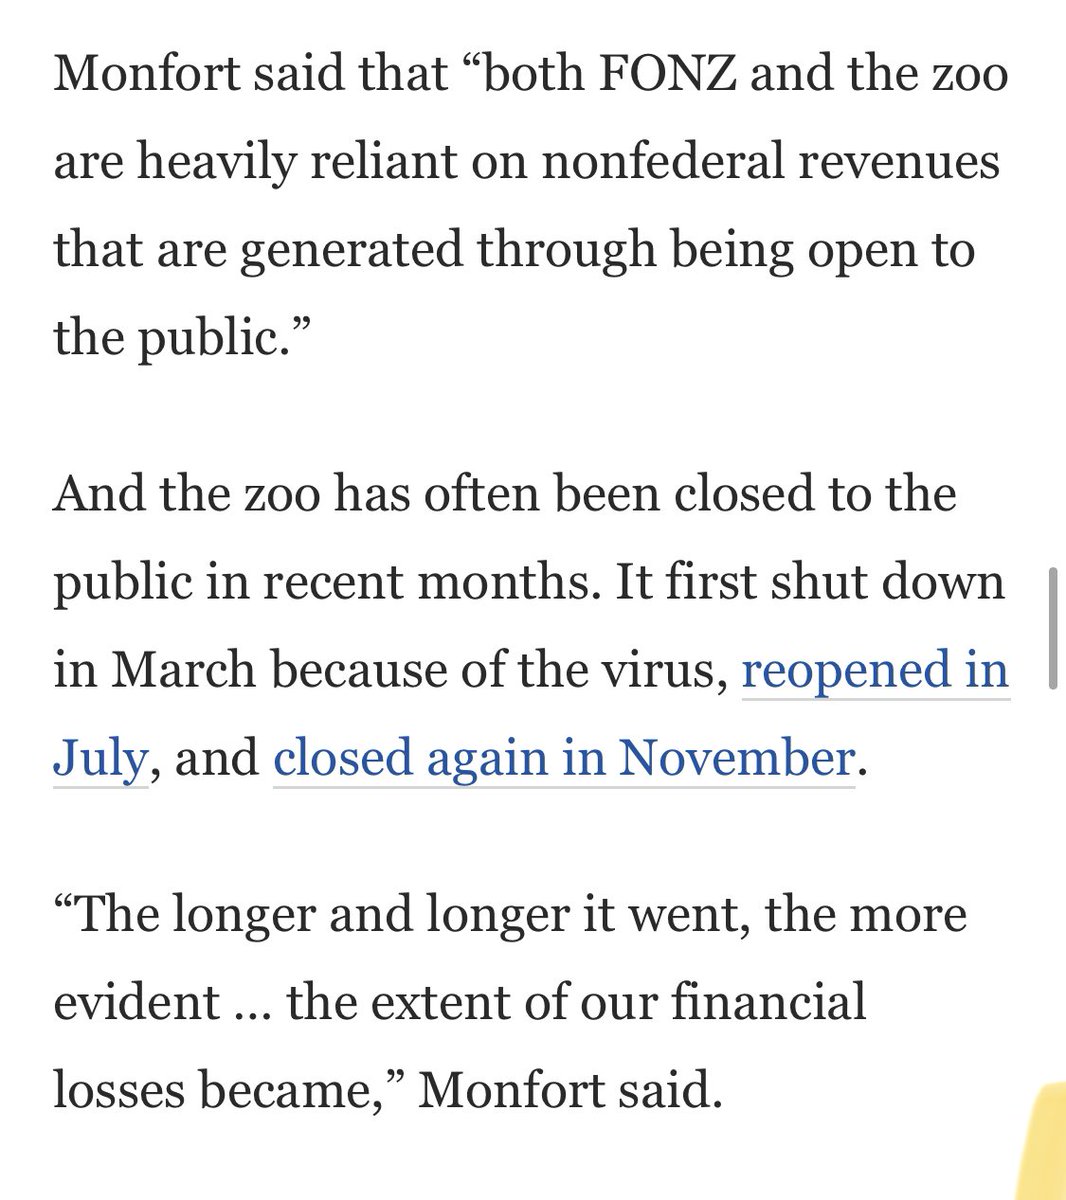 Why is it ending? Oh, it’s funny, actually. It turns out they couldn’t operate indefinitely with zero income. WHO COULD HAVE SEEN THIS COMING?